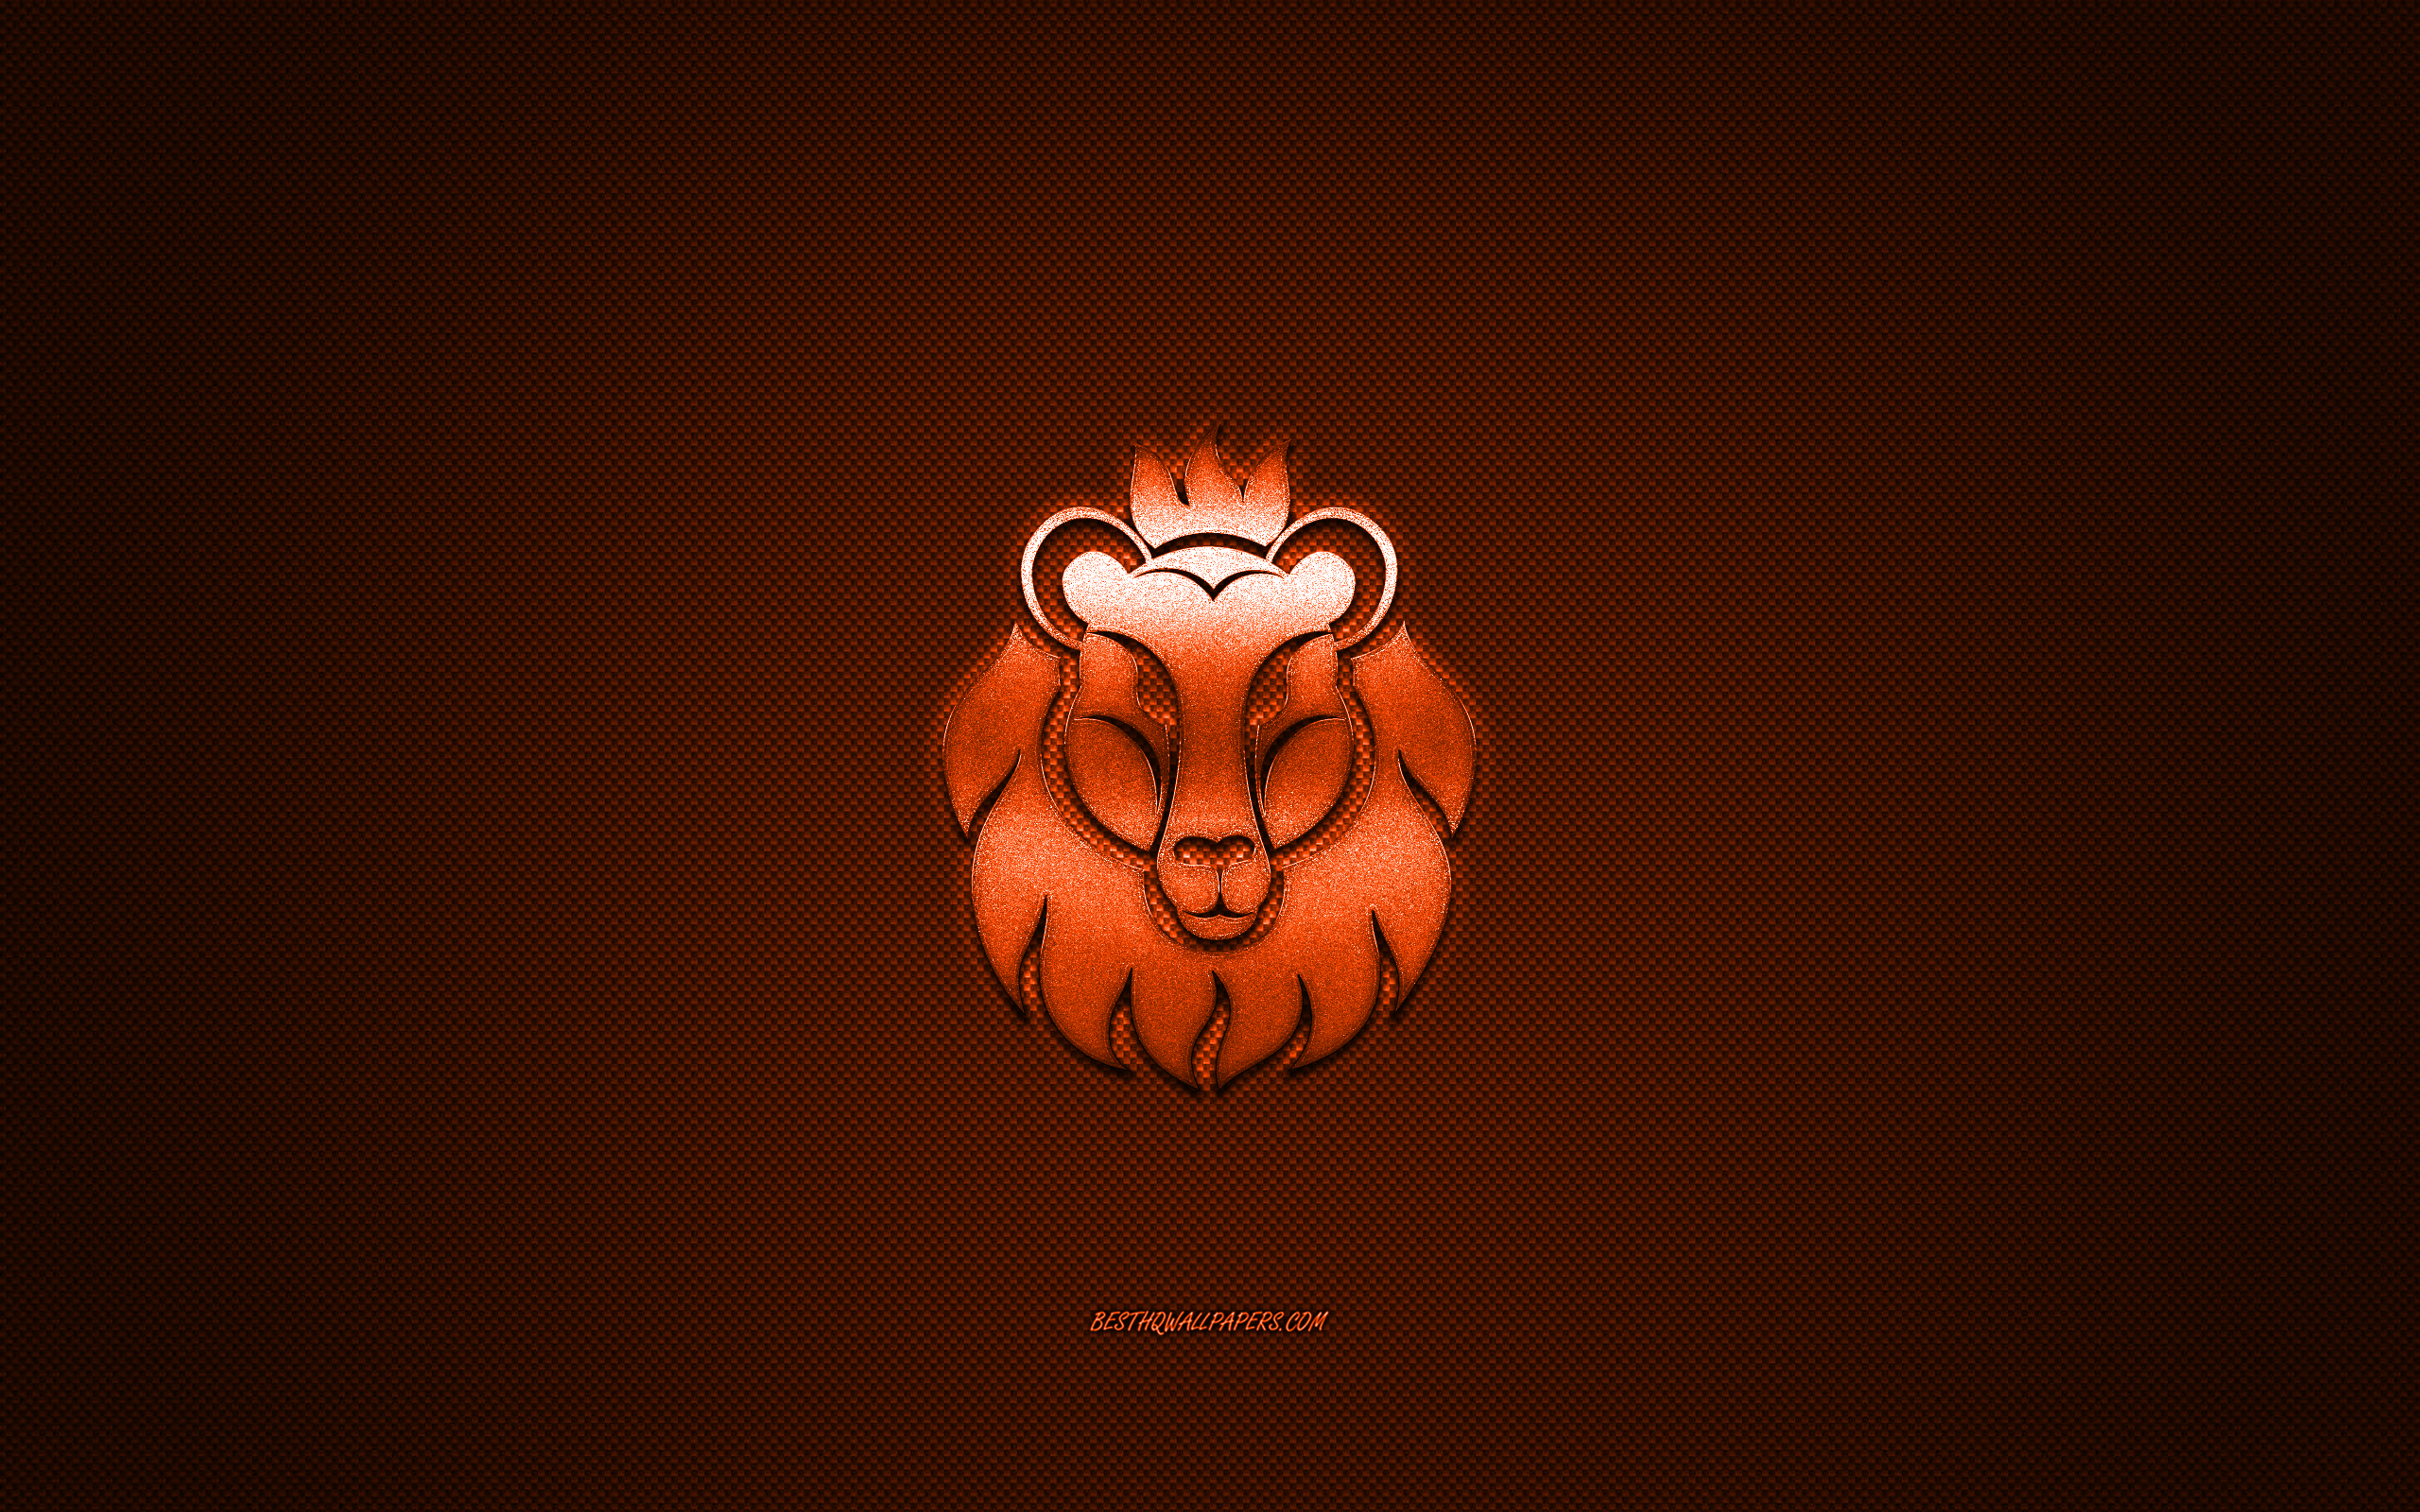 Download wallpaper Leo zodiac sign, metallic signs of the zodiac, Leo, orange carbon background, Leo Horoscope sign, Leo zodiac symbol for desktop with resolution 2560x1600. High Quality HD picture wallpaper